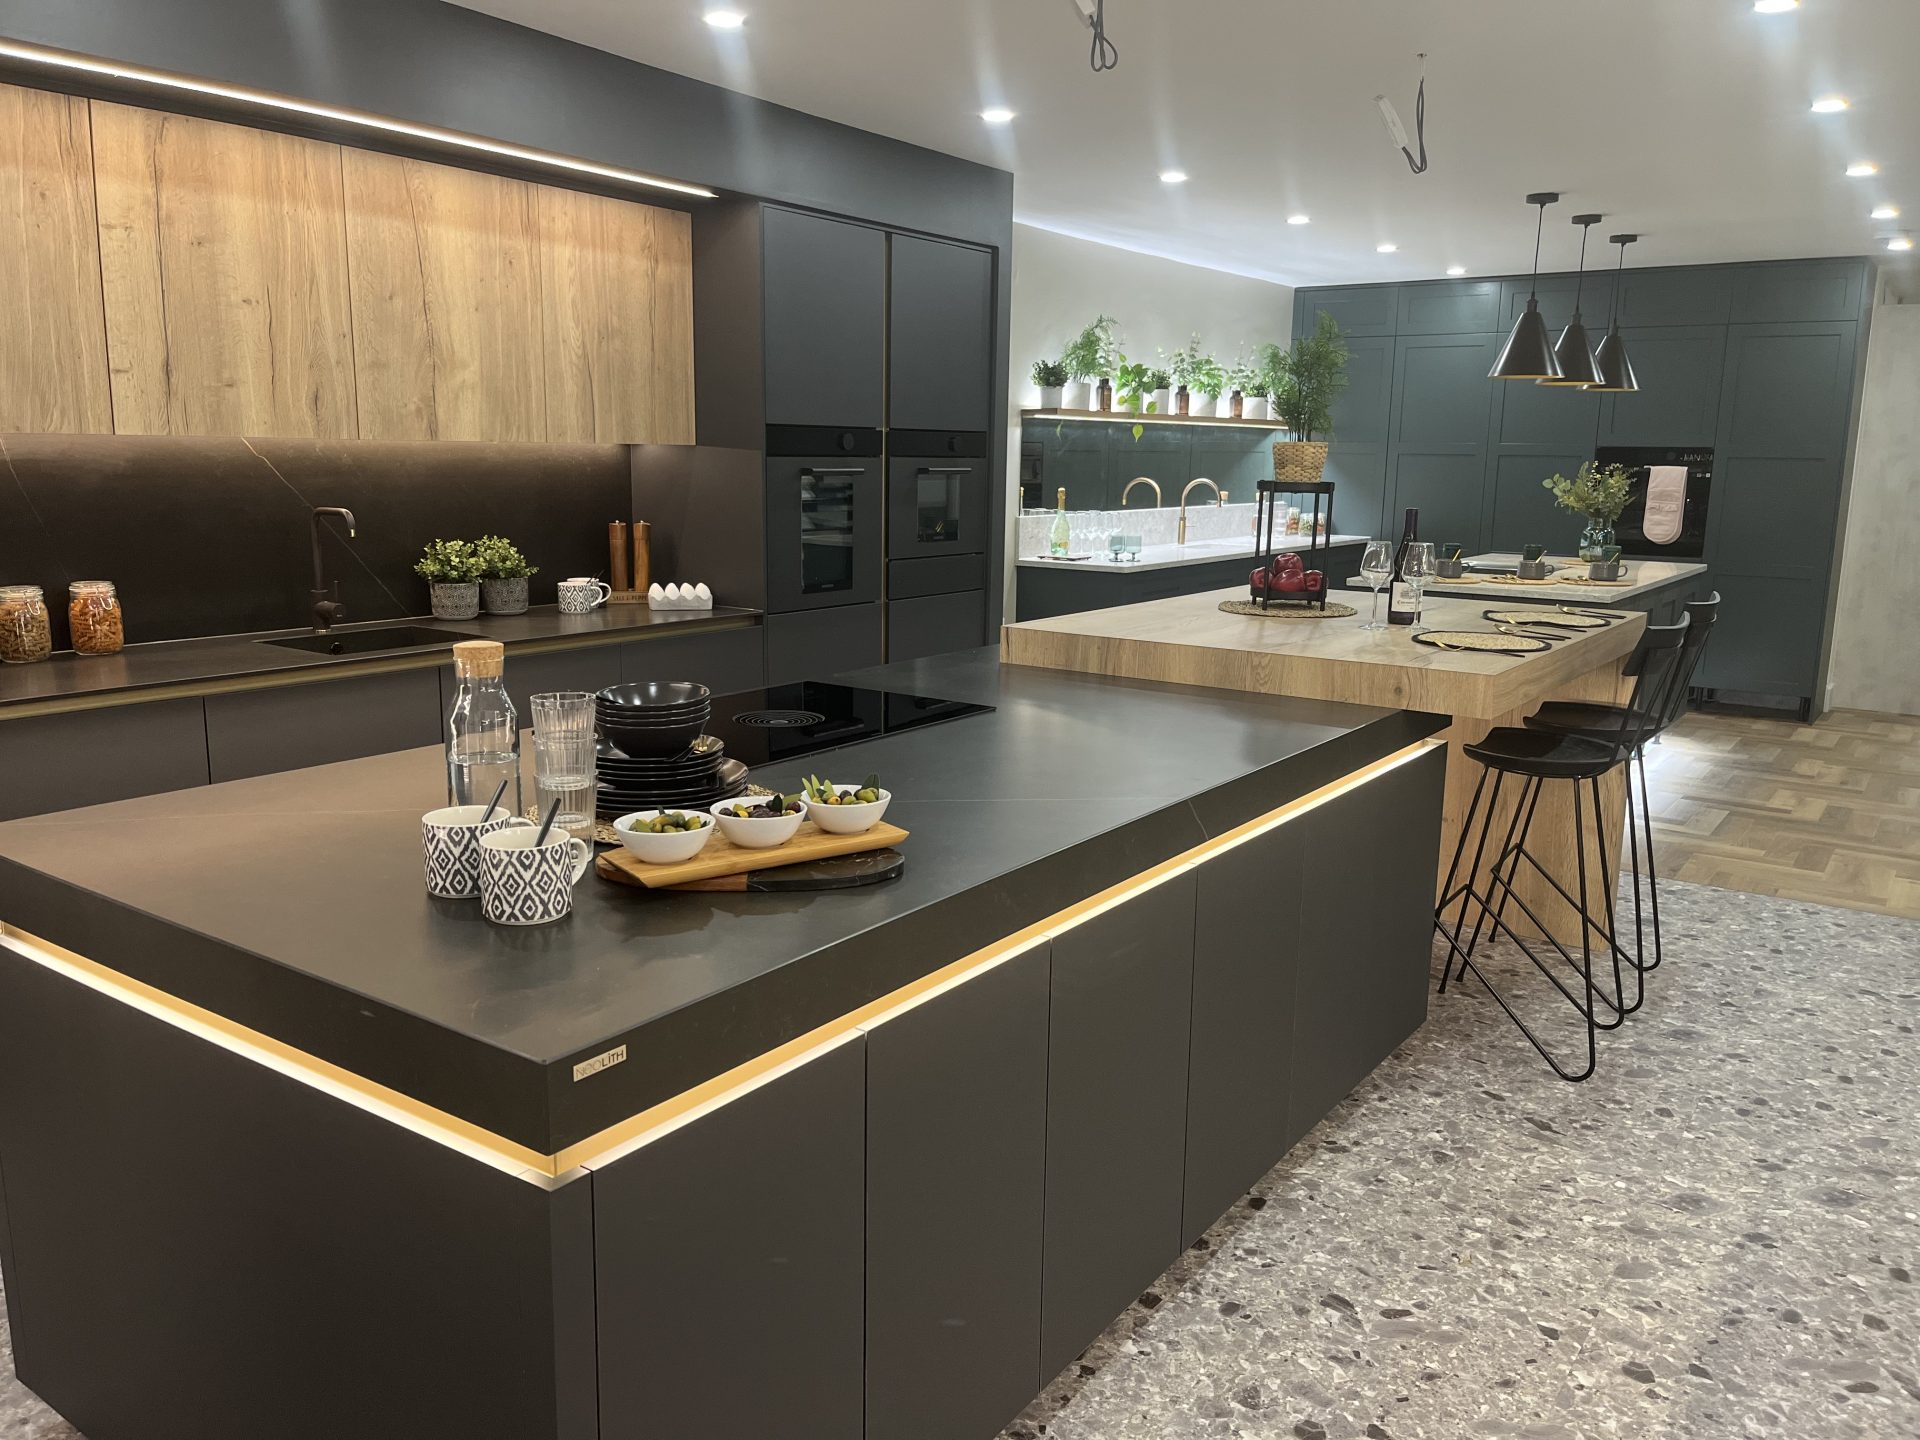 Kitchen showroom styling in Lincoln Colourhill, modern greys and wood